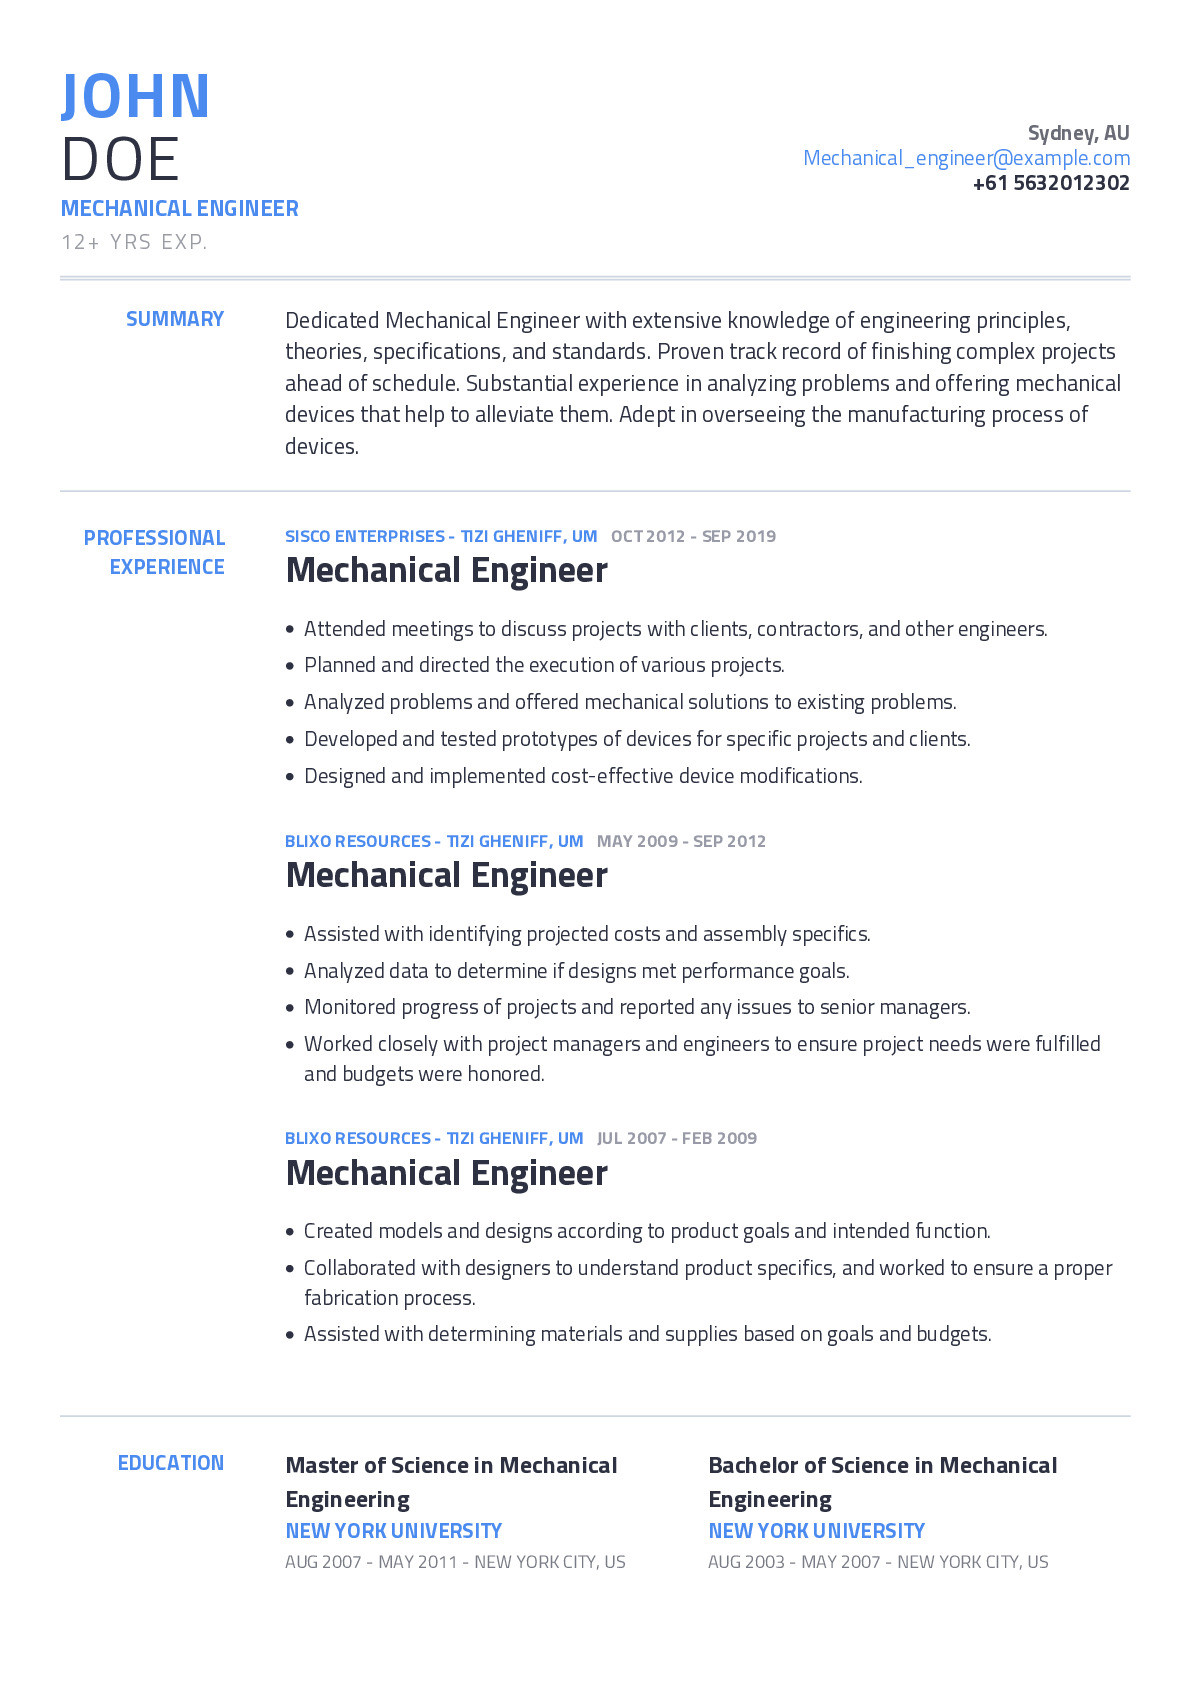 1 Year Experience Resume Sample for Mechanical Engineer Mechanical Engineer Resume Example with Content Sample Craftmycv